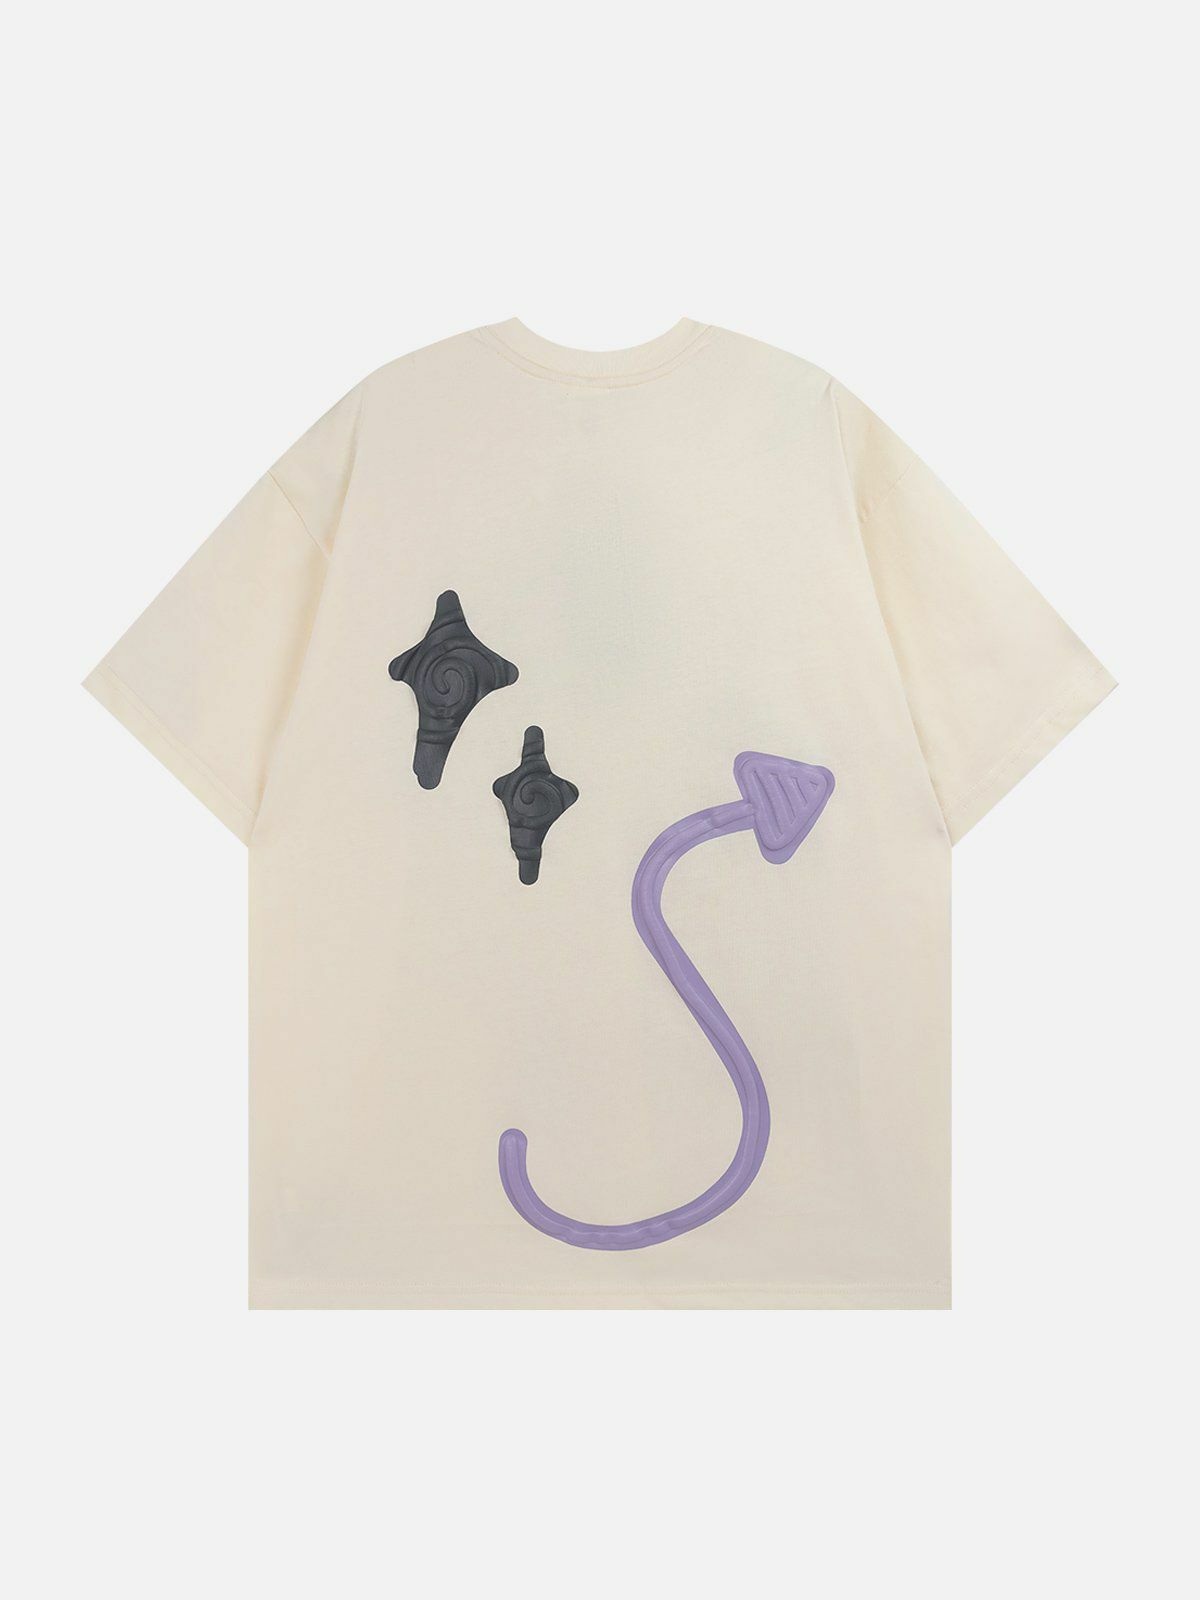 edgy star graphic tee retro streetwear essential with a youthful twist 3194